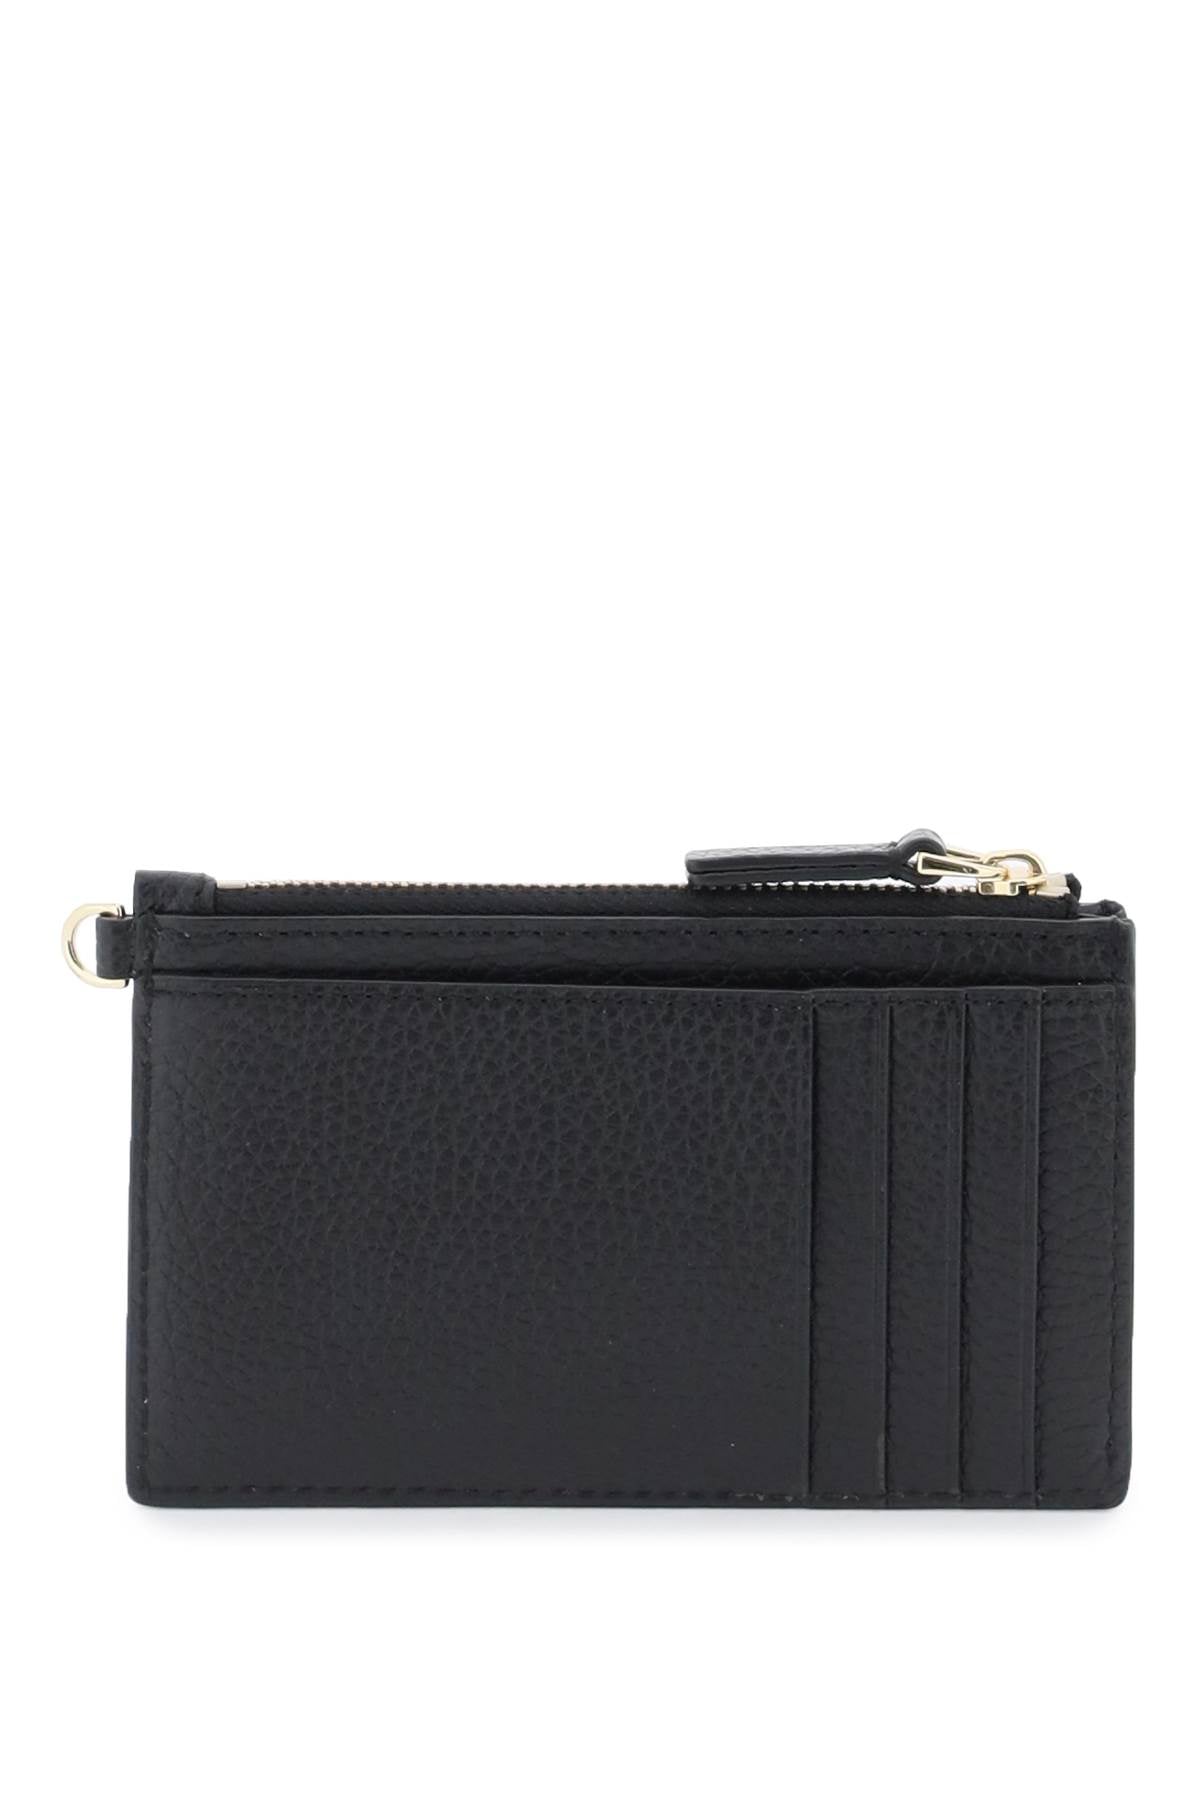 Marc jacobs the leather top zip wristlet-2